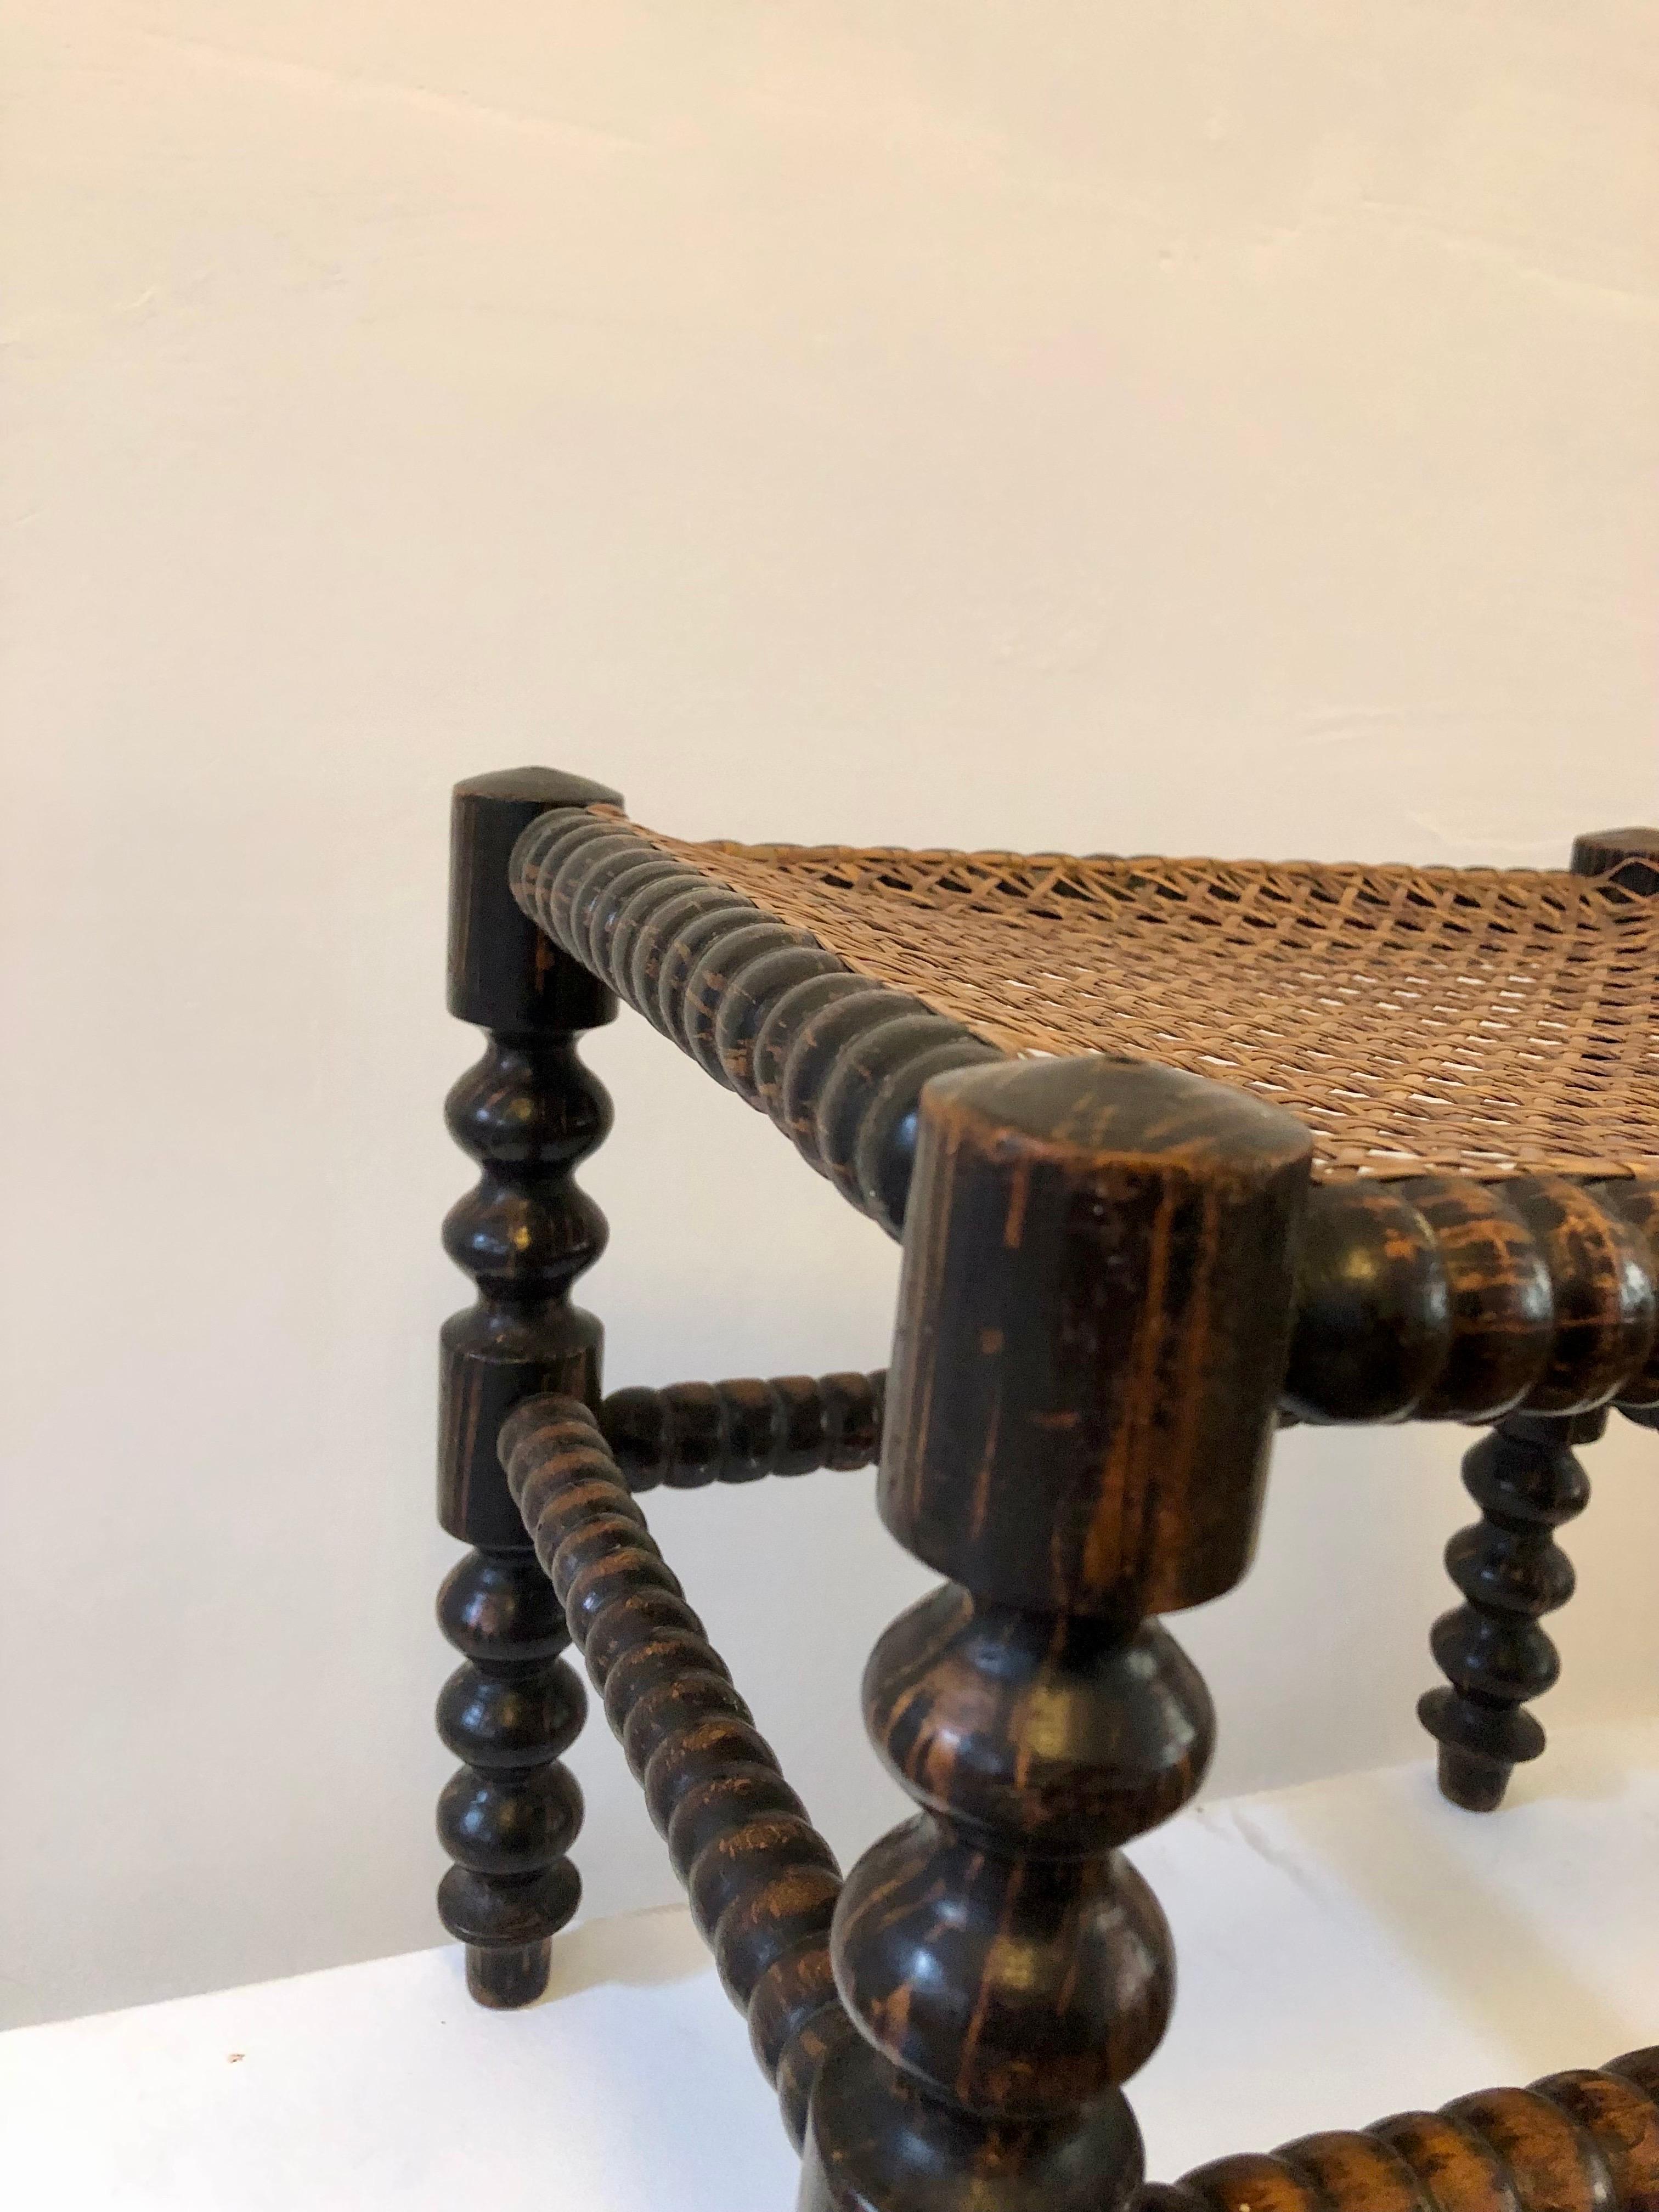 Early 20th Century A footstool from the early 20th century - turned wood and caning - France. For Sale